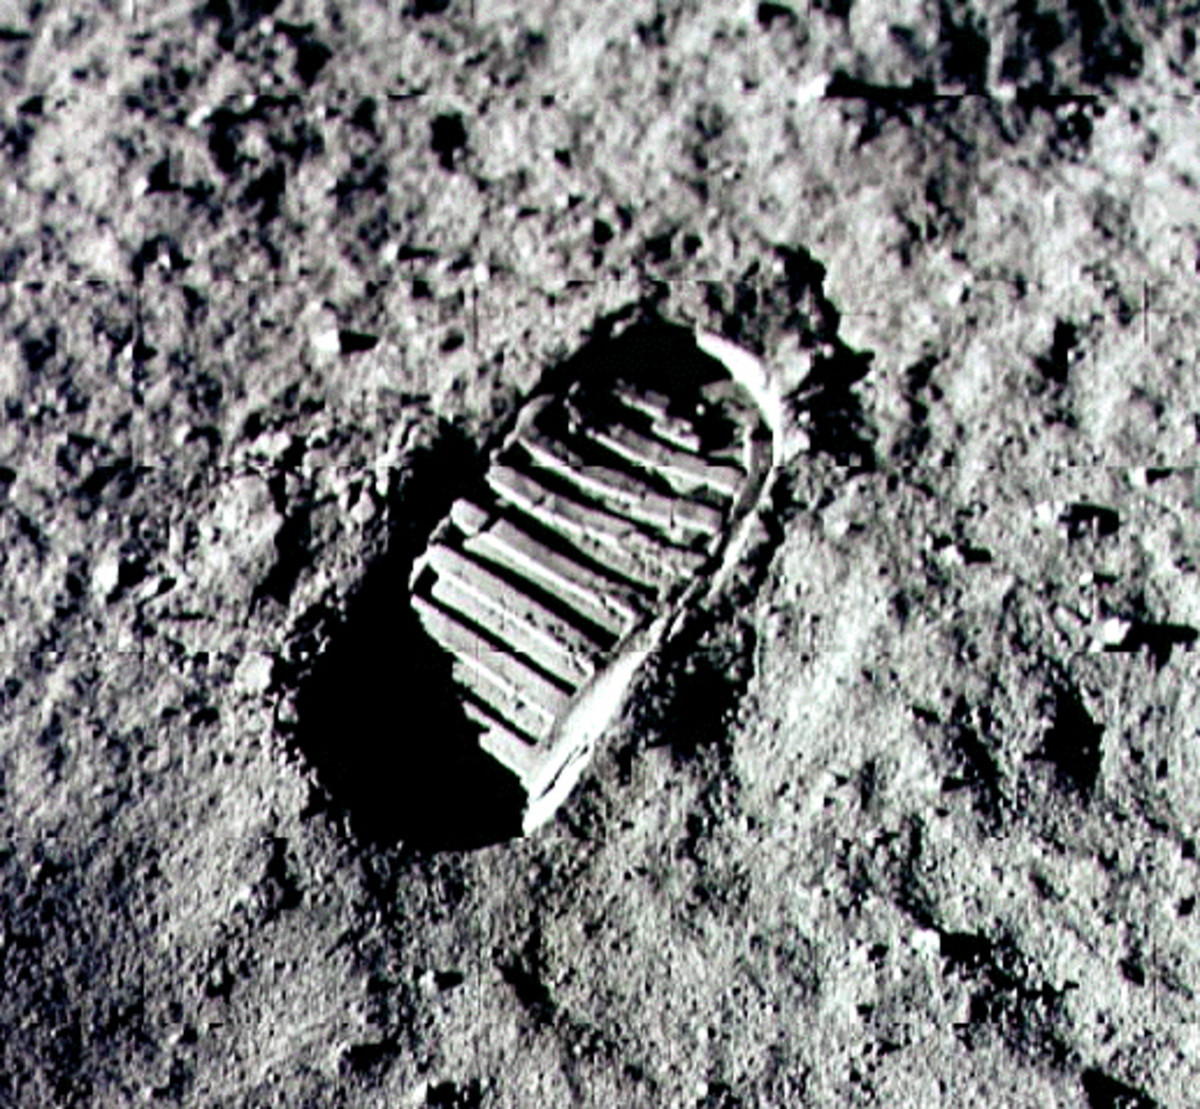 Footprint on the Moon - the first imprint of mankind on another world